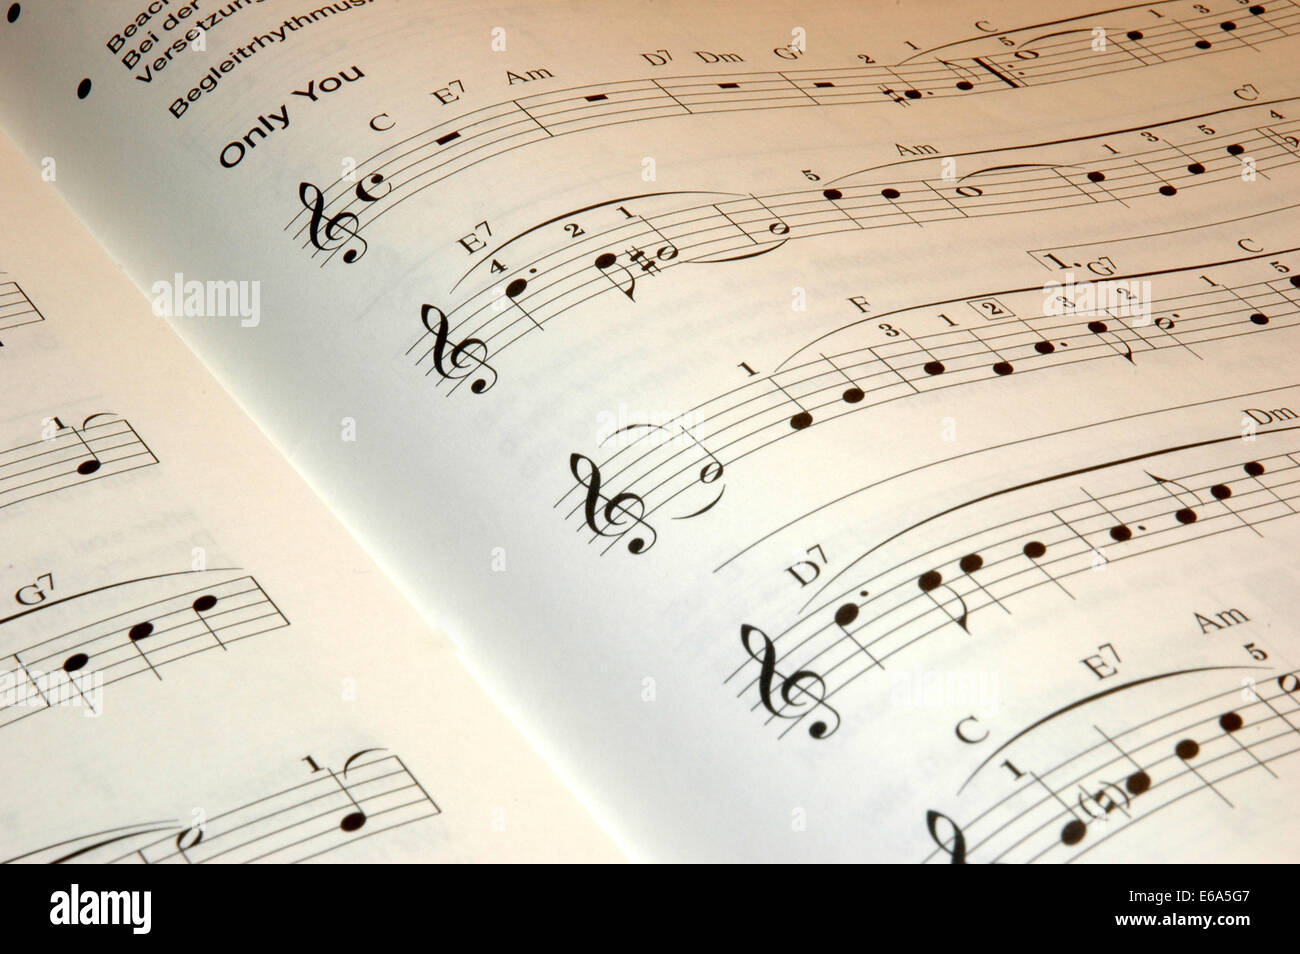 10 Best Music Images Sheet Music With Letters Piano Songs Easy